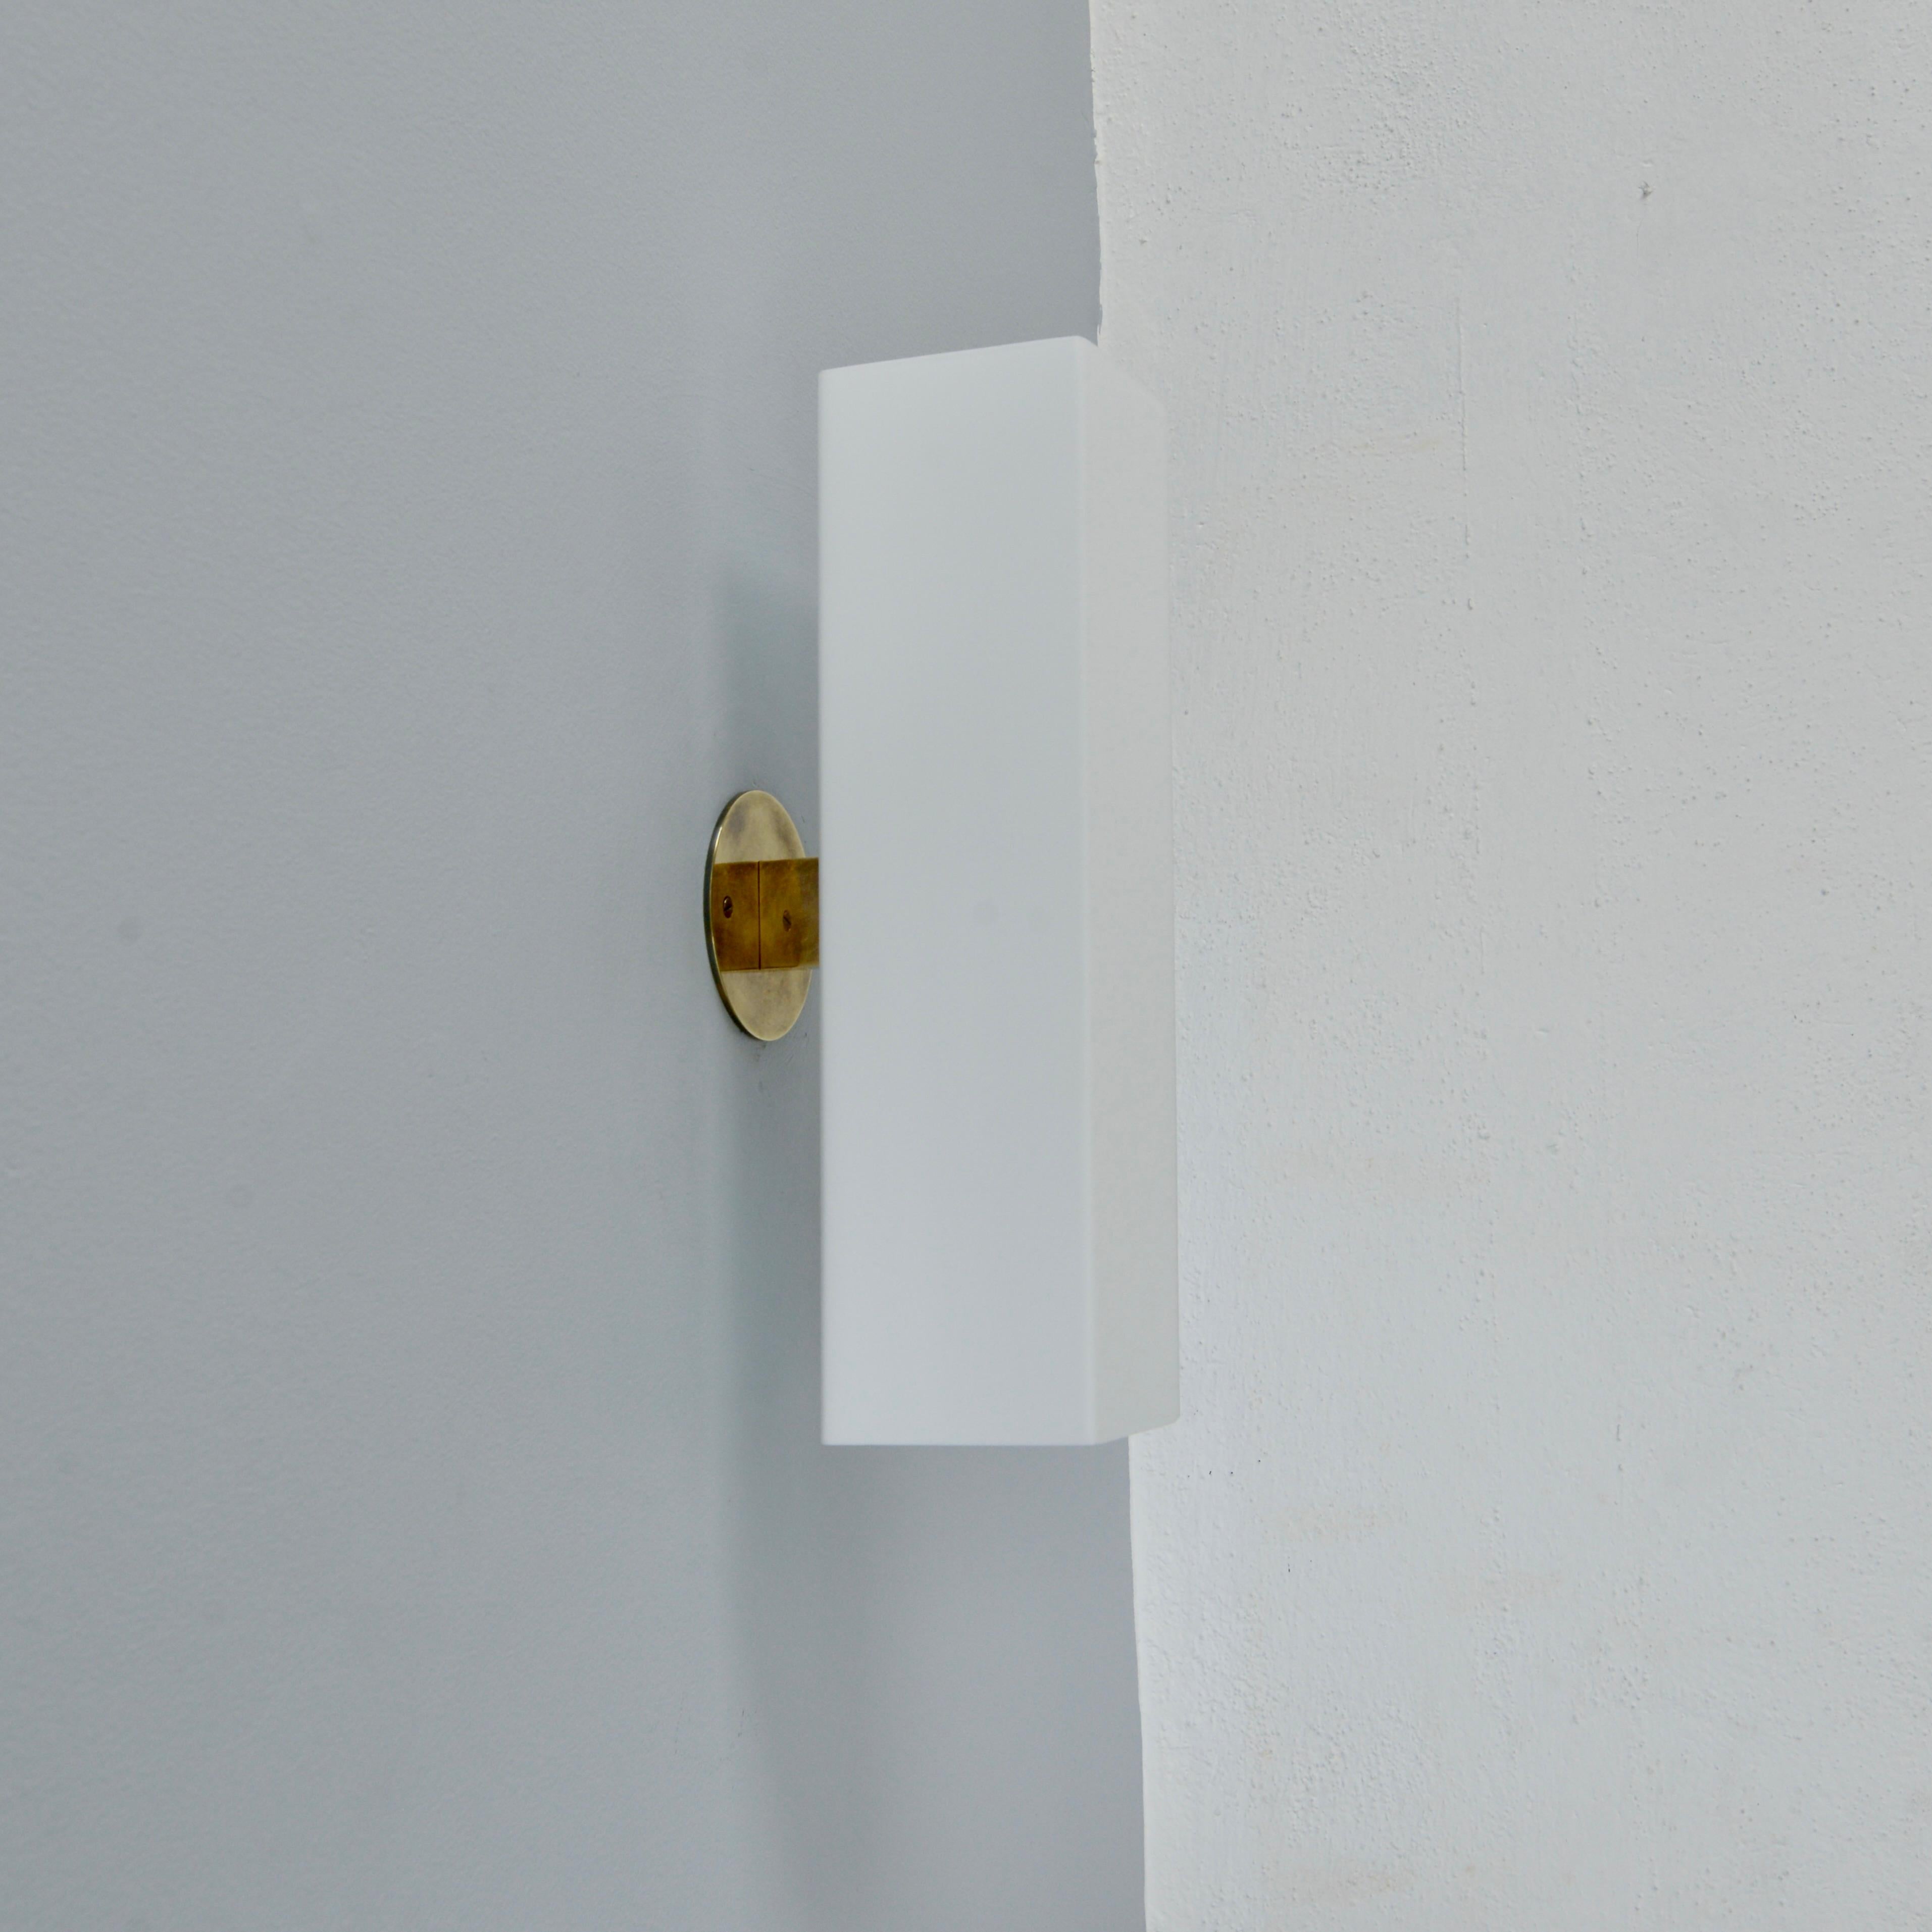 American LUZQT NB Sconce by Lumfardo Luminaires For Sale